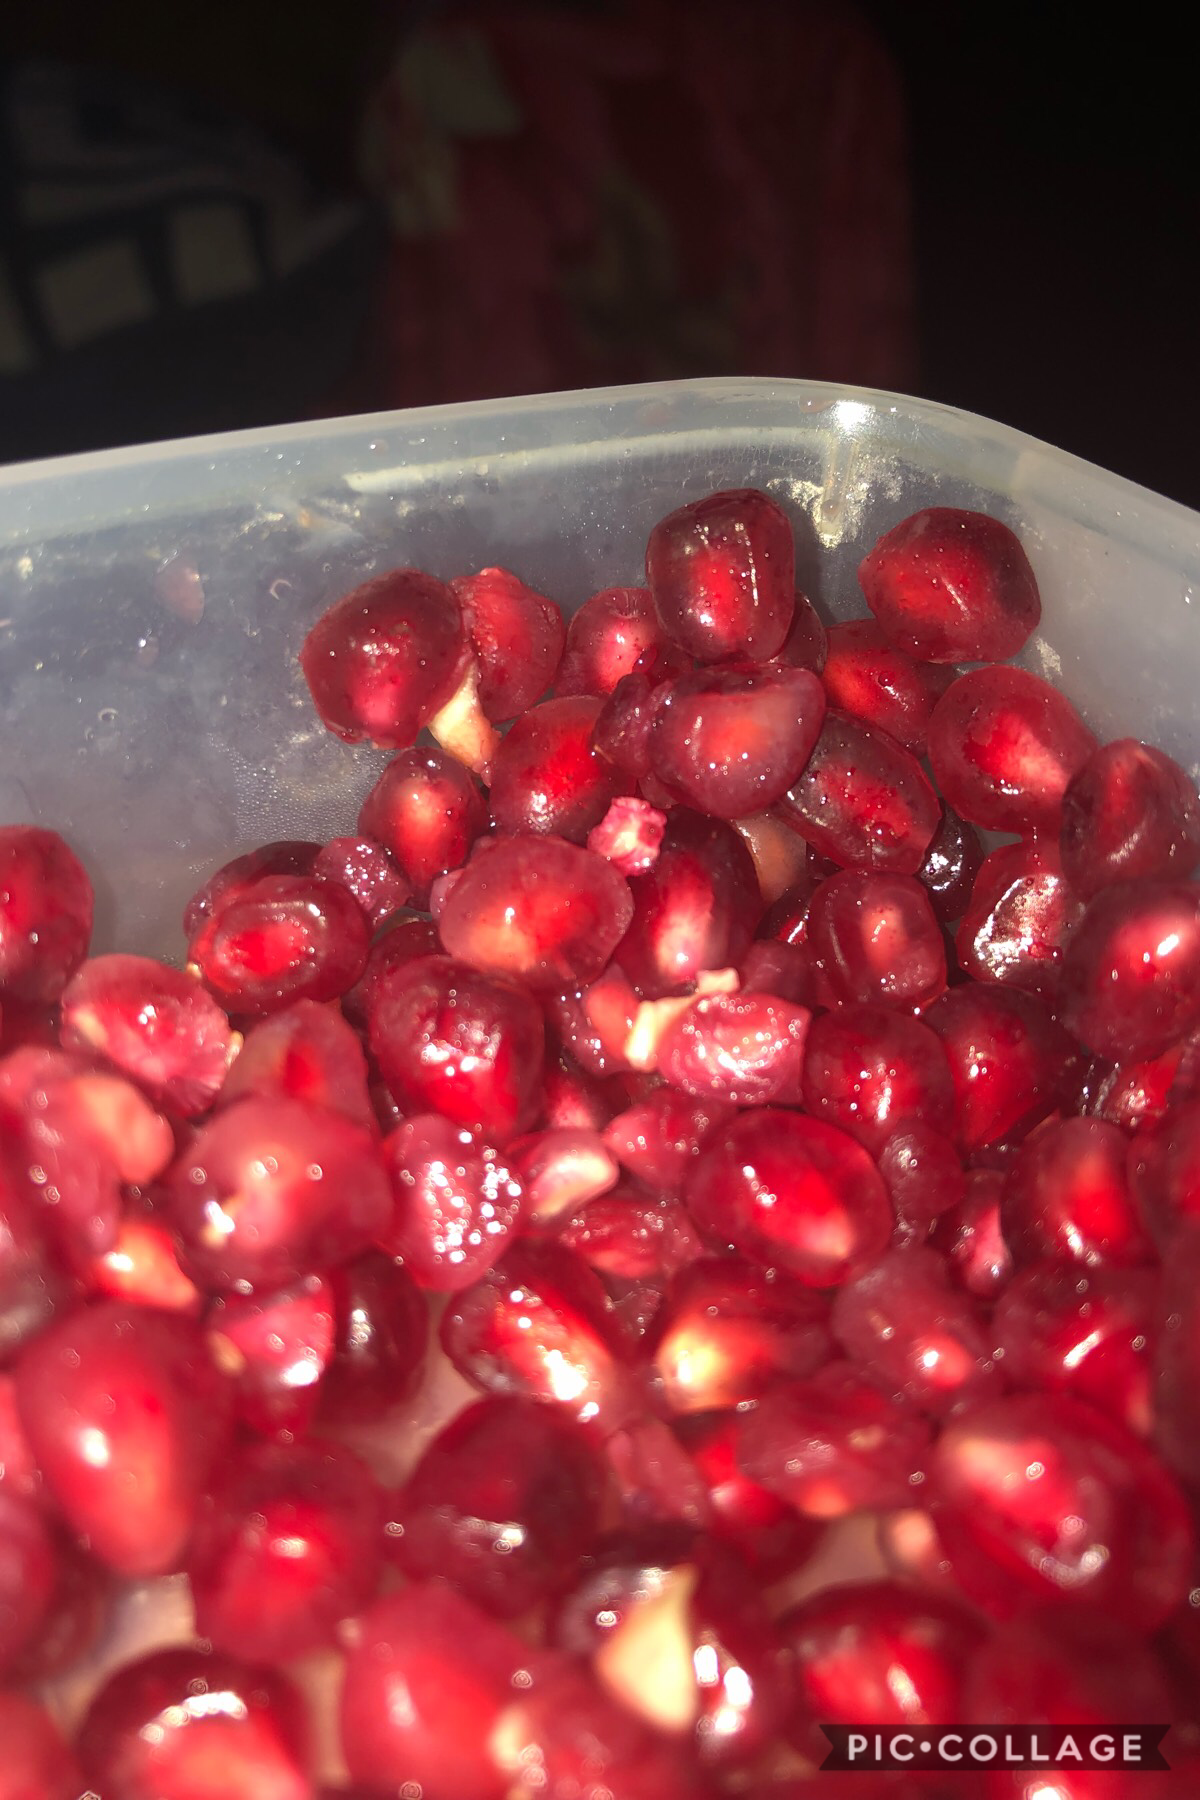 pomegranate 😌 I love pomegranate but I hate peeling it 🌝no school today 🙌🏼 its Election Day 💥 I have some homework to complete but other than that, I’m free for the day ⚡️💘🌸 its raining outside & its so pretty 😍